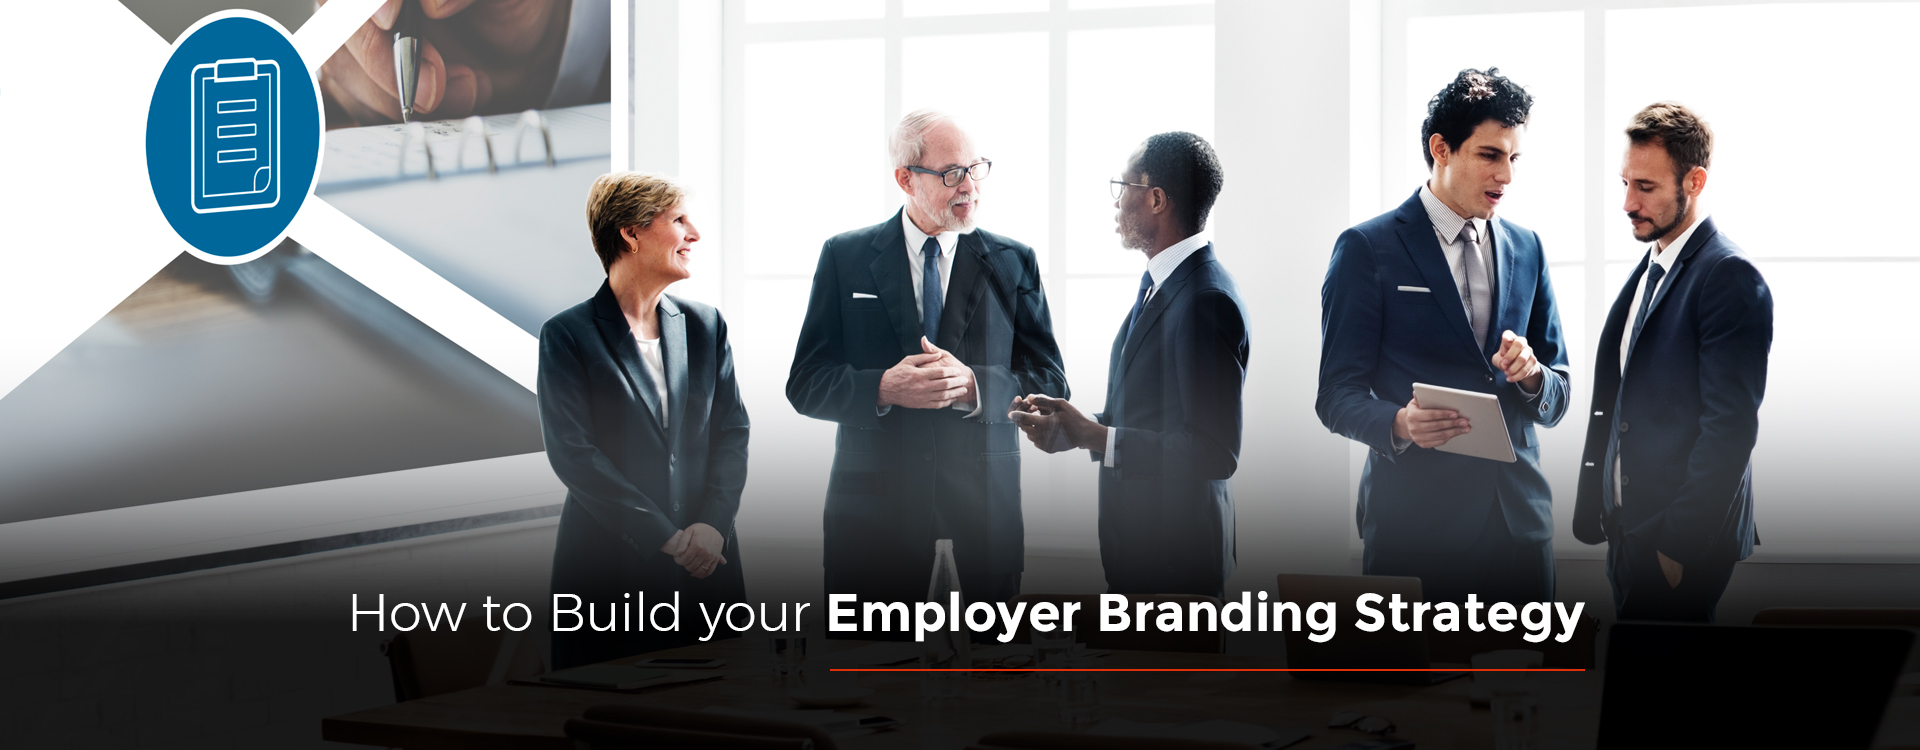 How to Build your Employer Branding Strategy